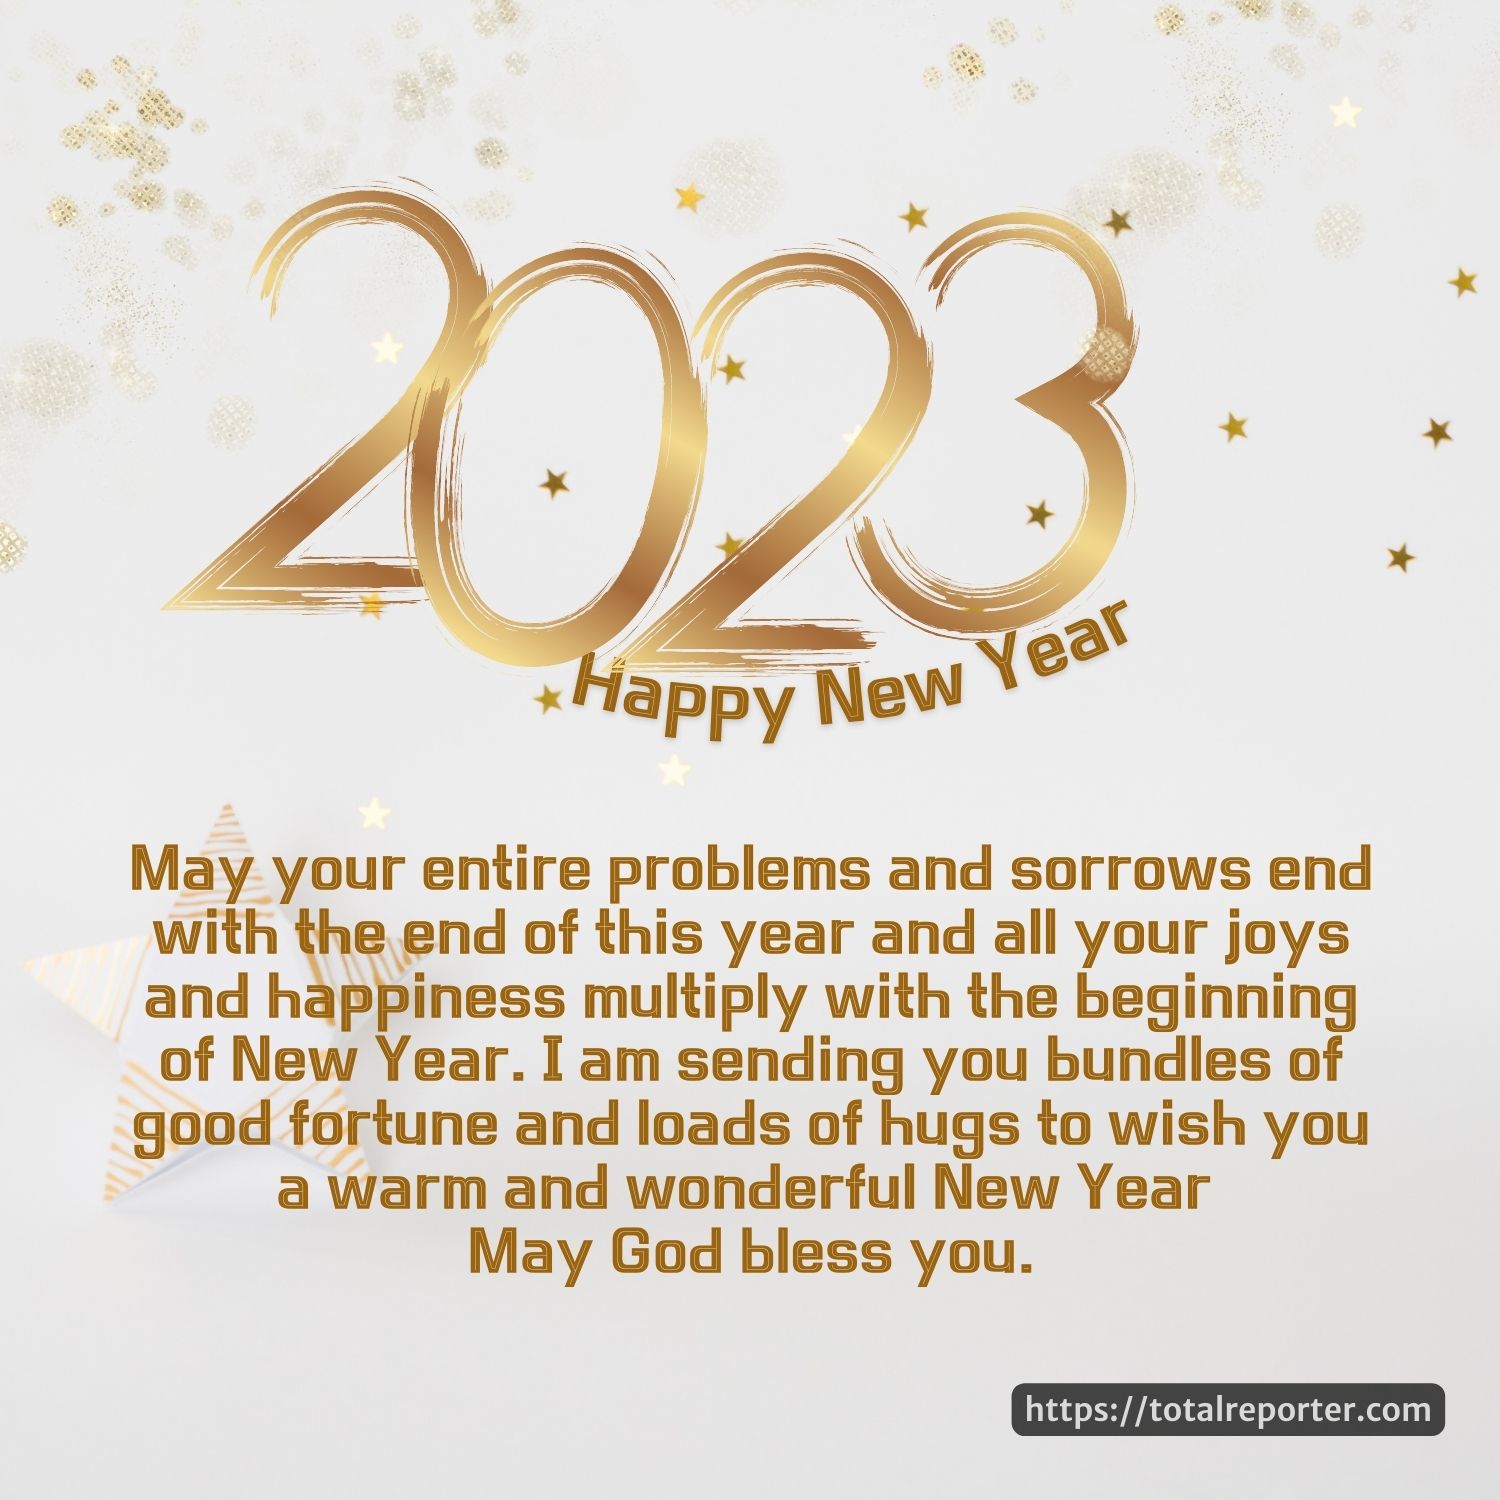 Happy New Year wishes 2023 Images for Facebook